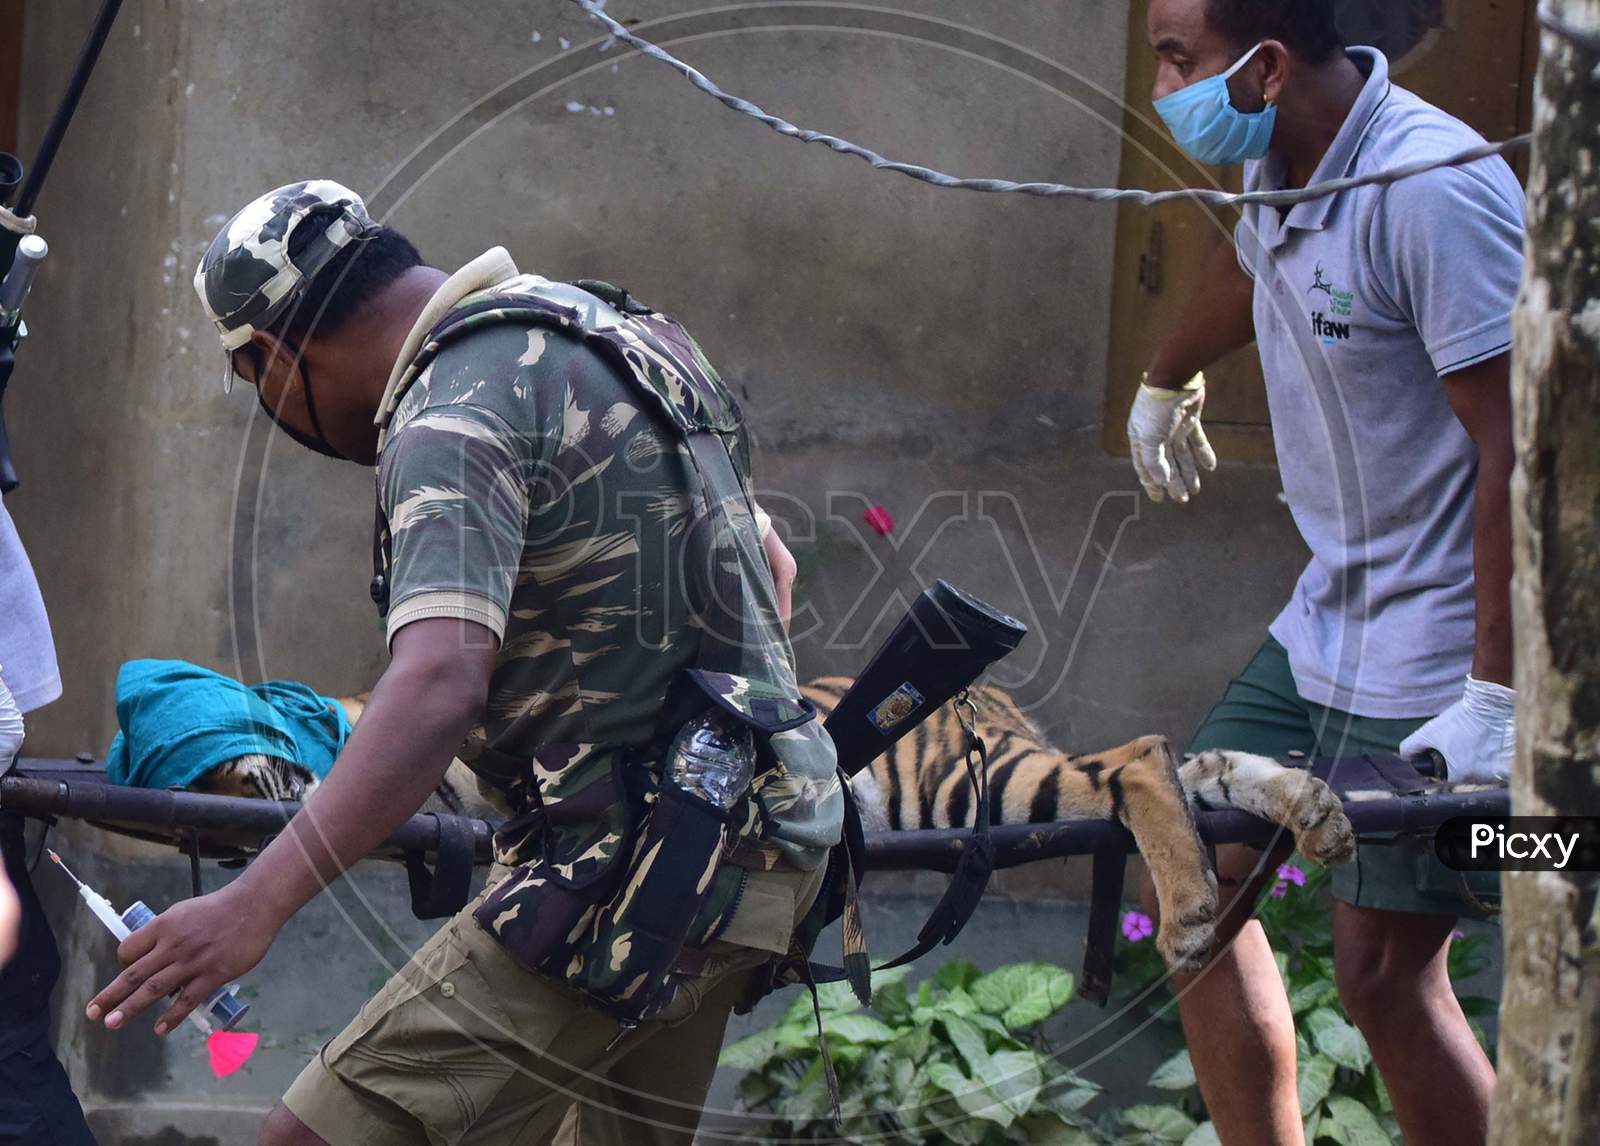 Forest officials carry a tranquilized tigress that strayed into a house in Nagaon, Assam on July 15, 2020.